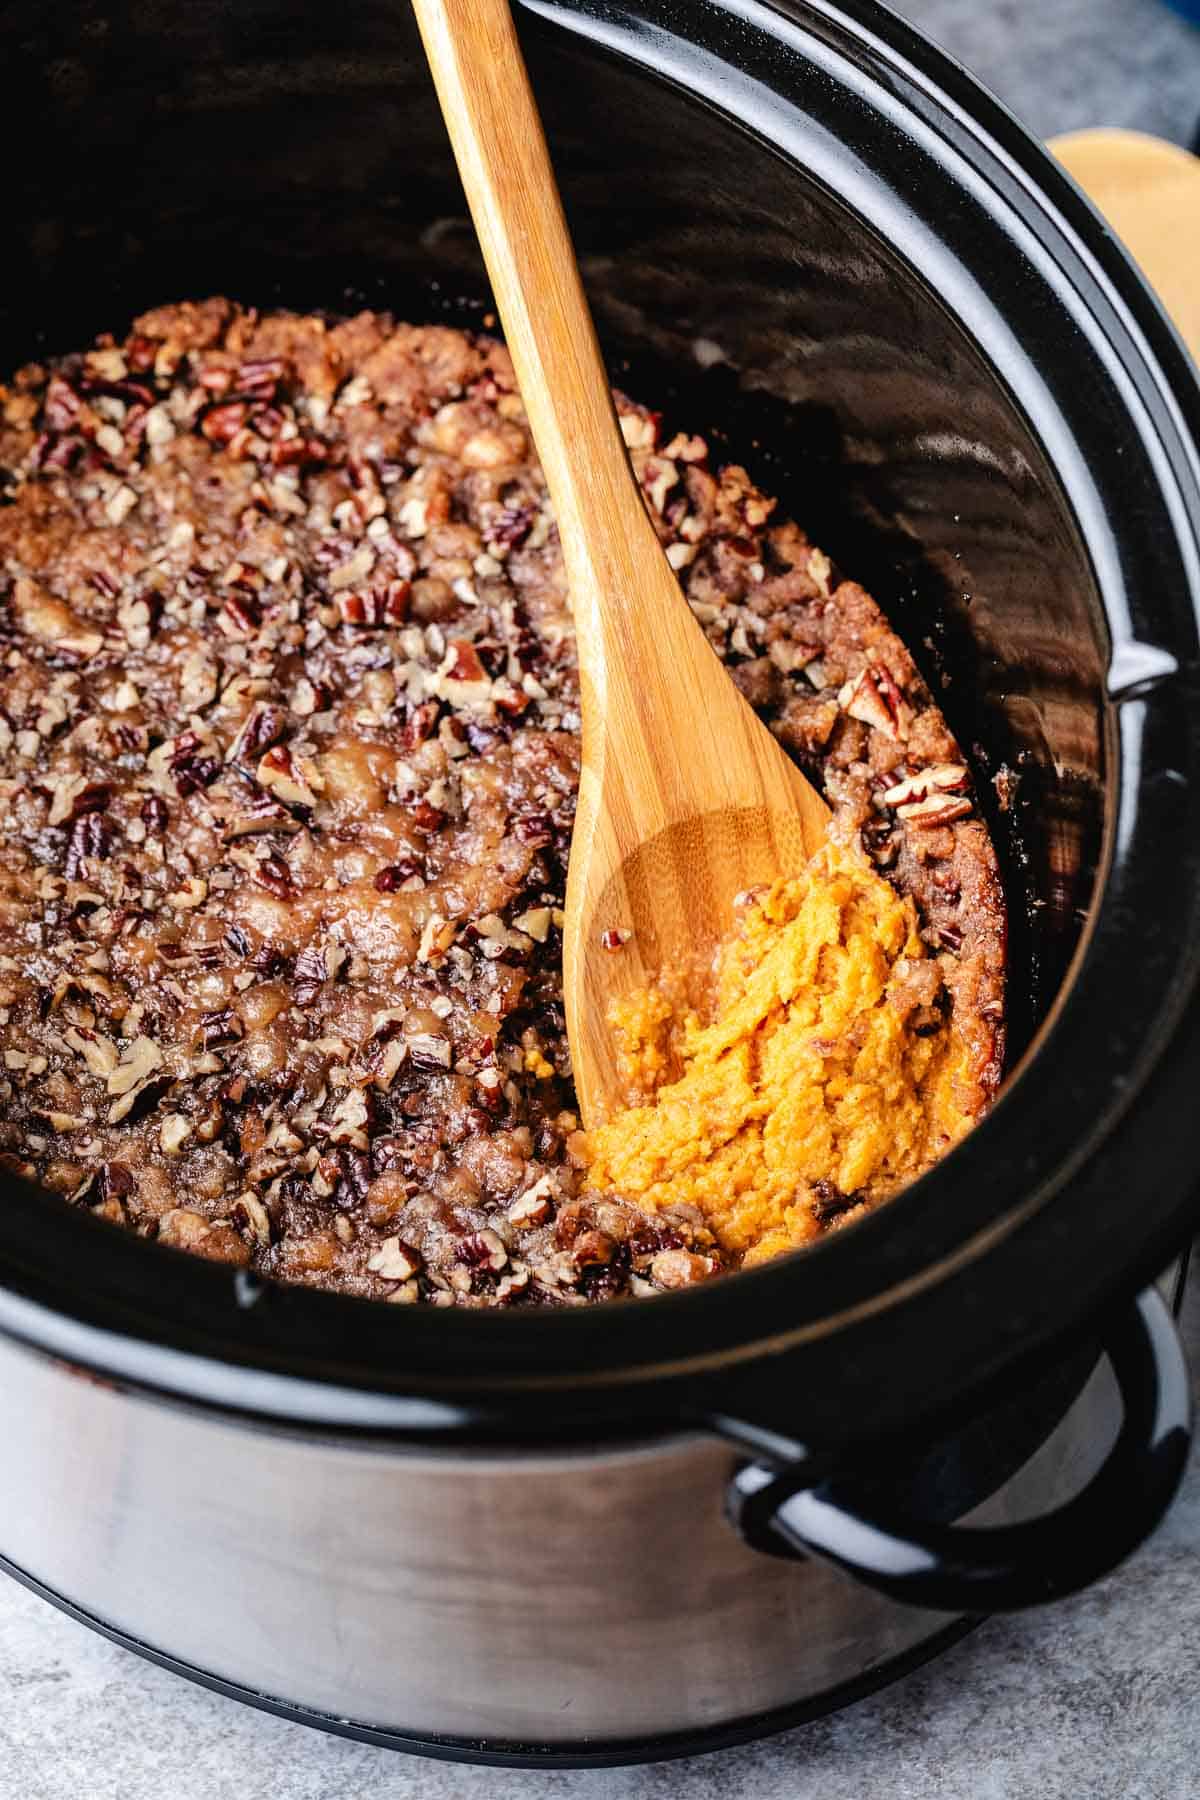 Spoon scooping sweet potato casserole from a slow cooker.